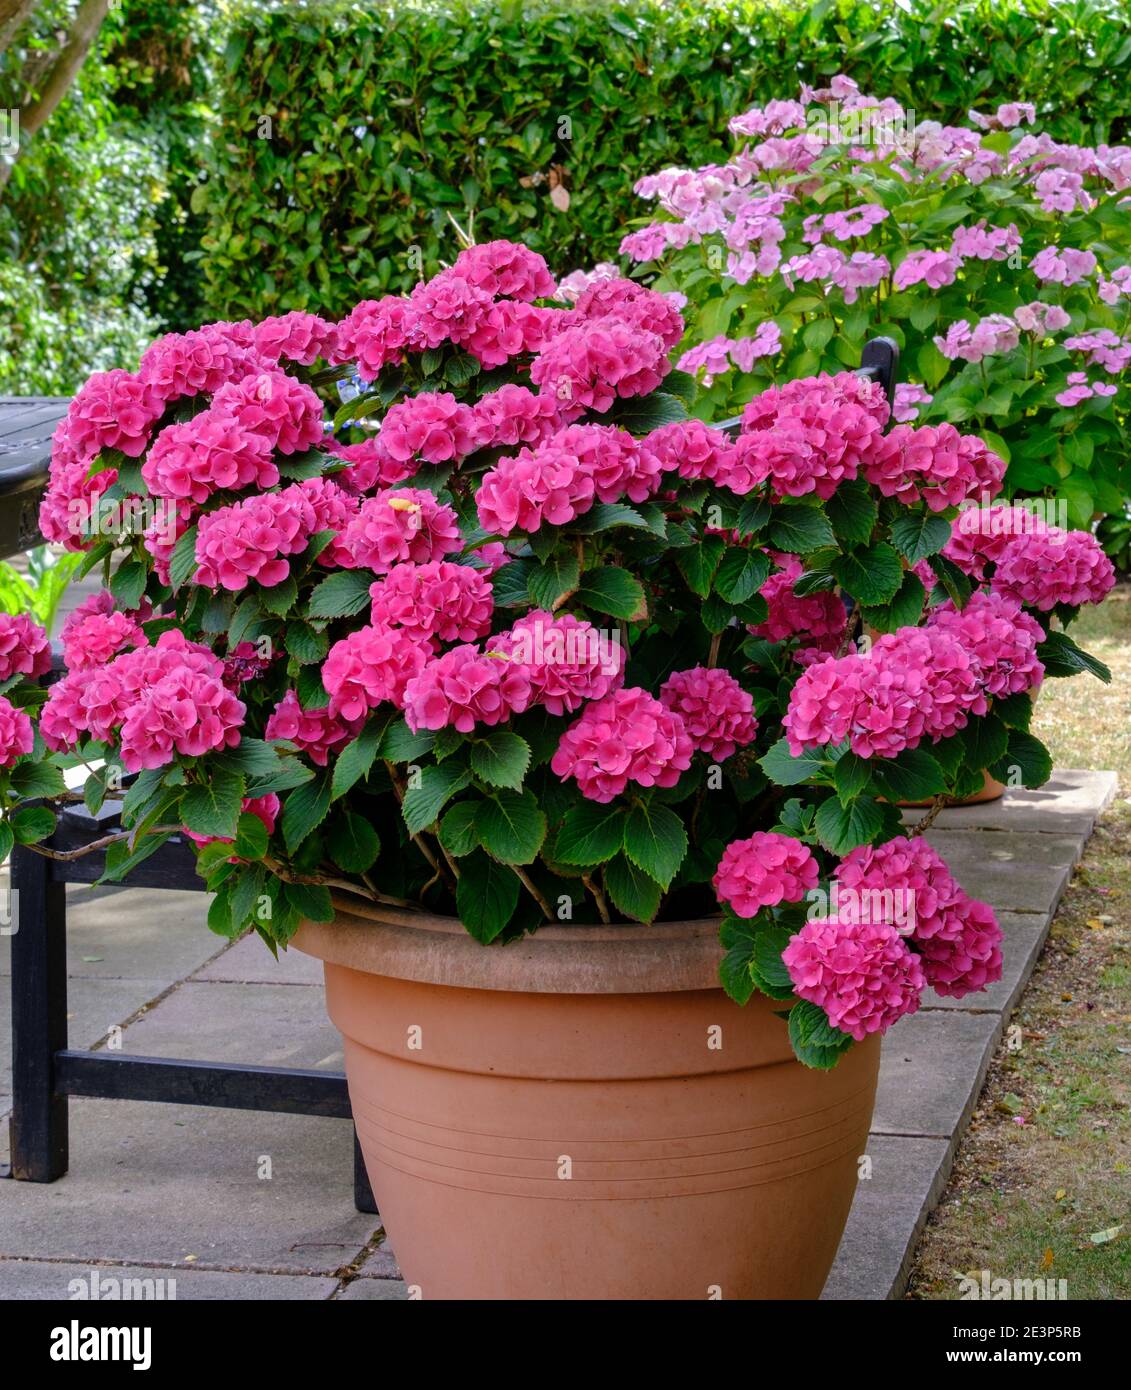 Large outdoor flower pot with pink hydrangeas in full bloom. Stock Photo